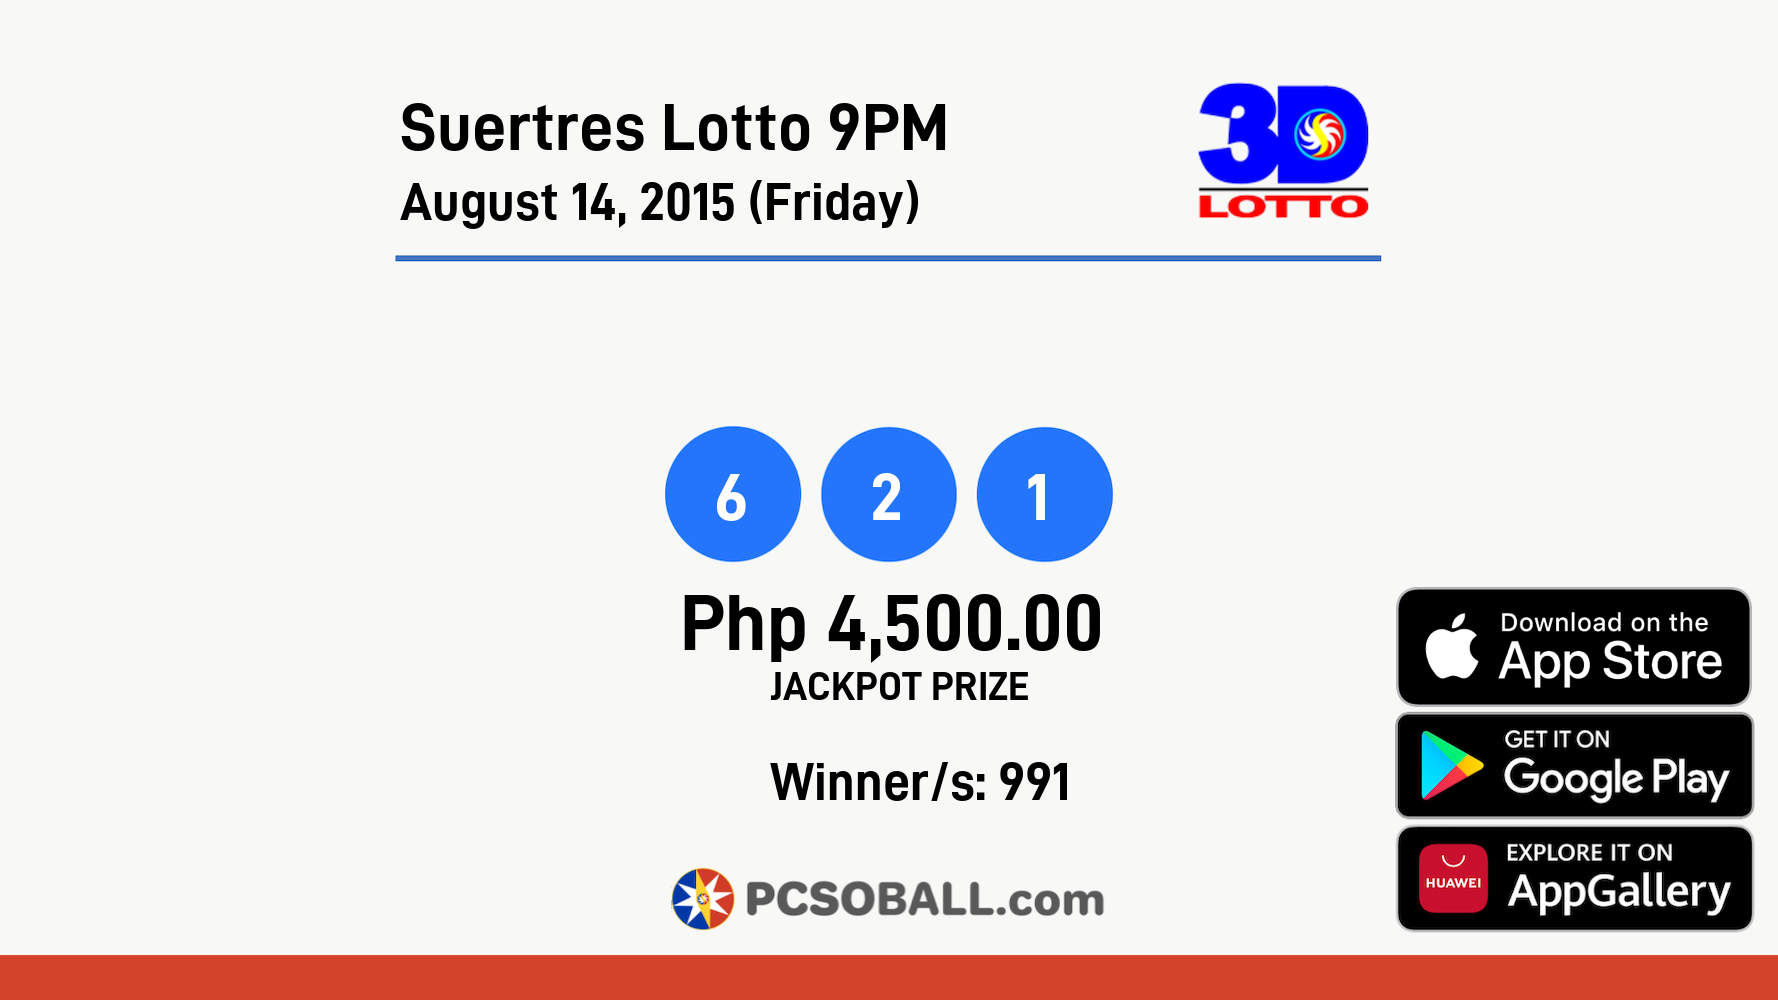 Suertres Lotto 9PM August 14, 2015 (Friday) Result